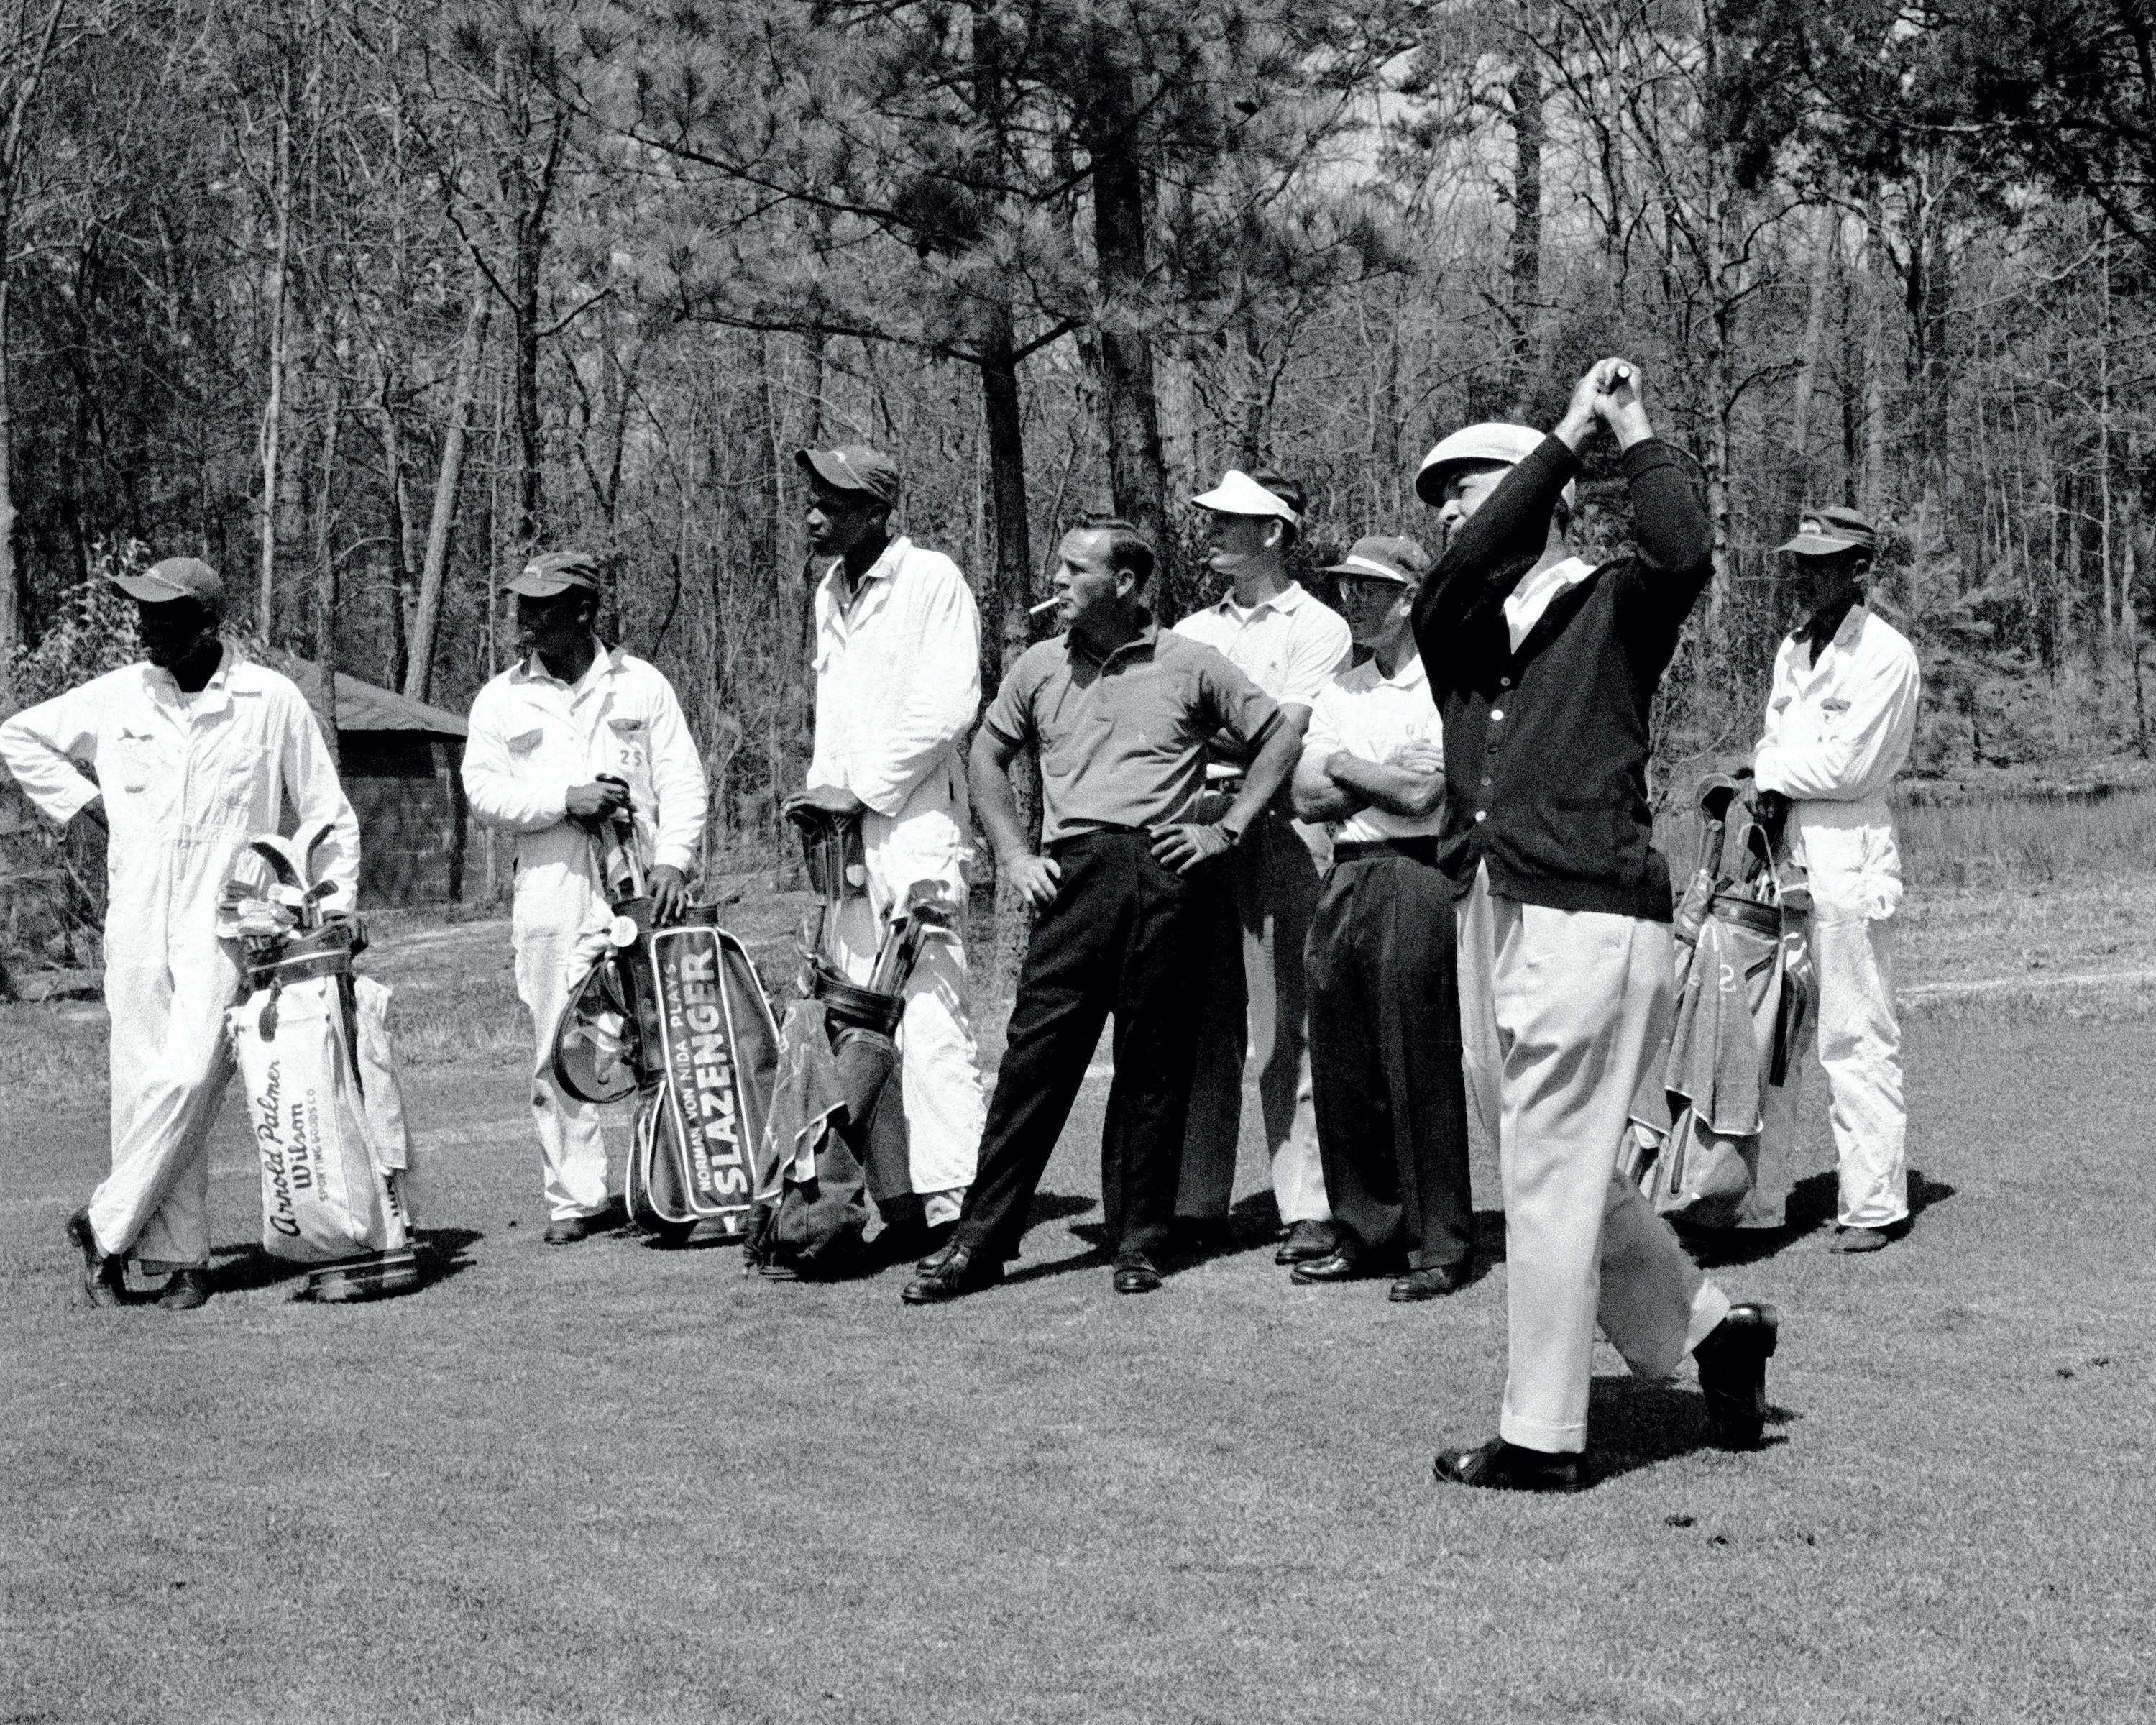 Arnold Palmer smokes and swings a club on the green with caddies around him.